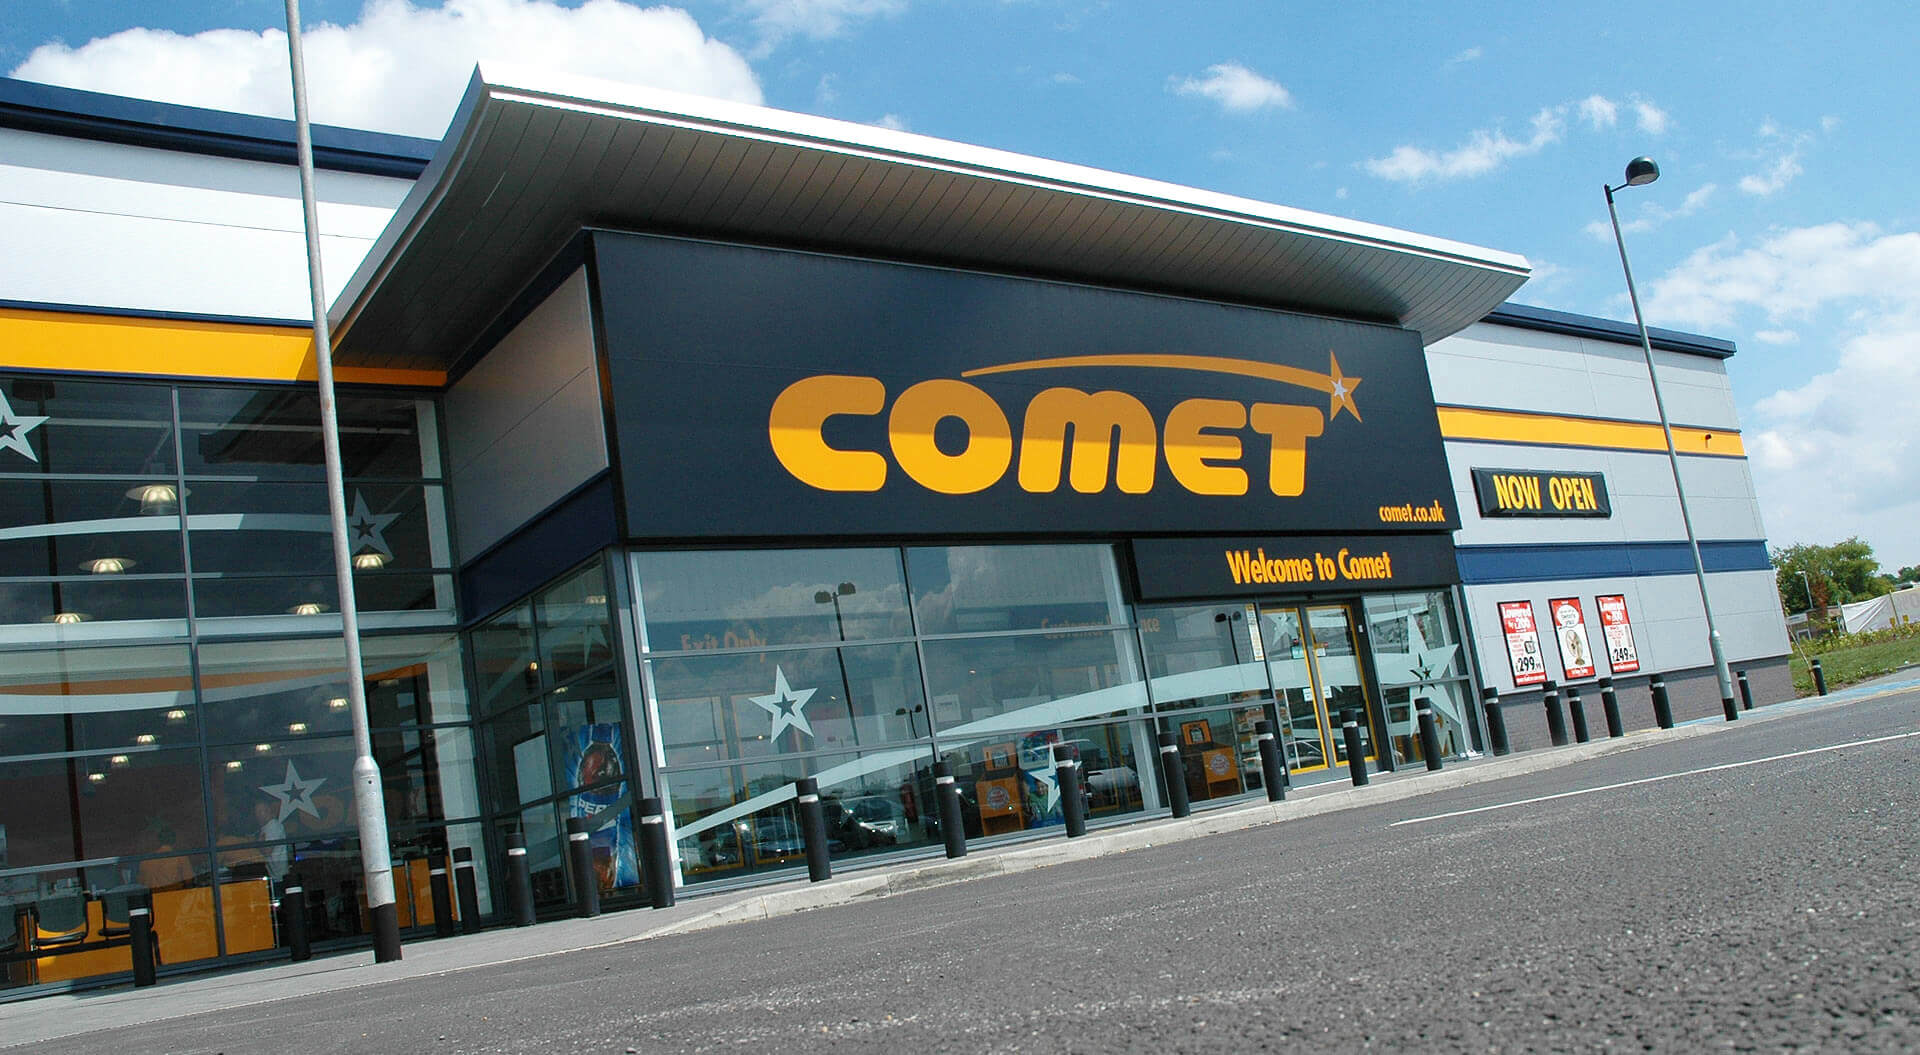 Comet Technology Store interior design edge-of-town superstore 